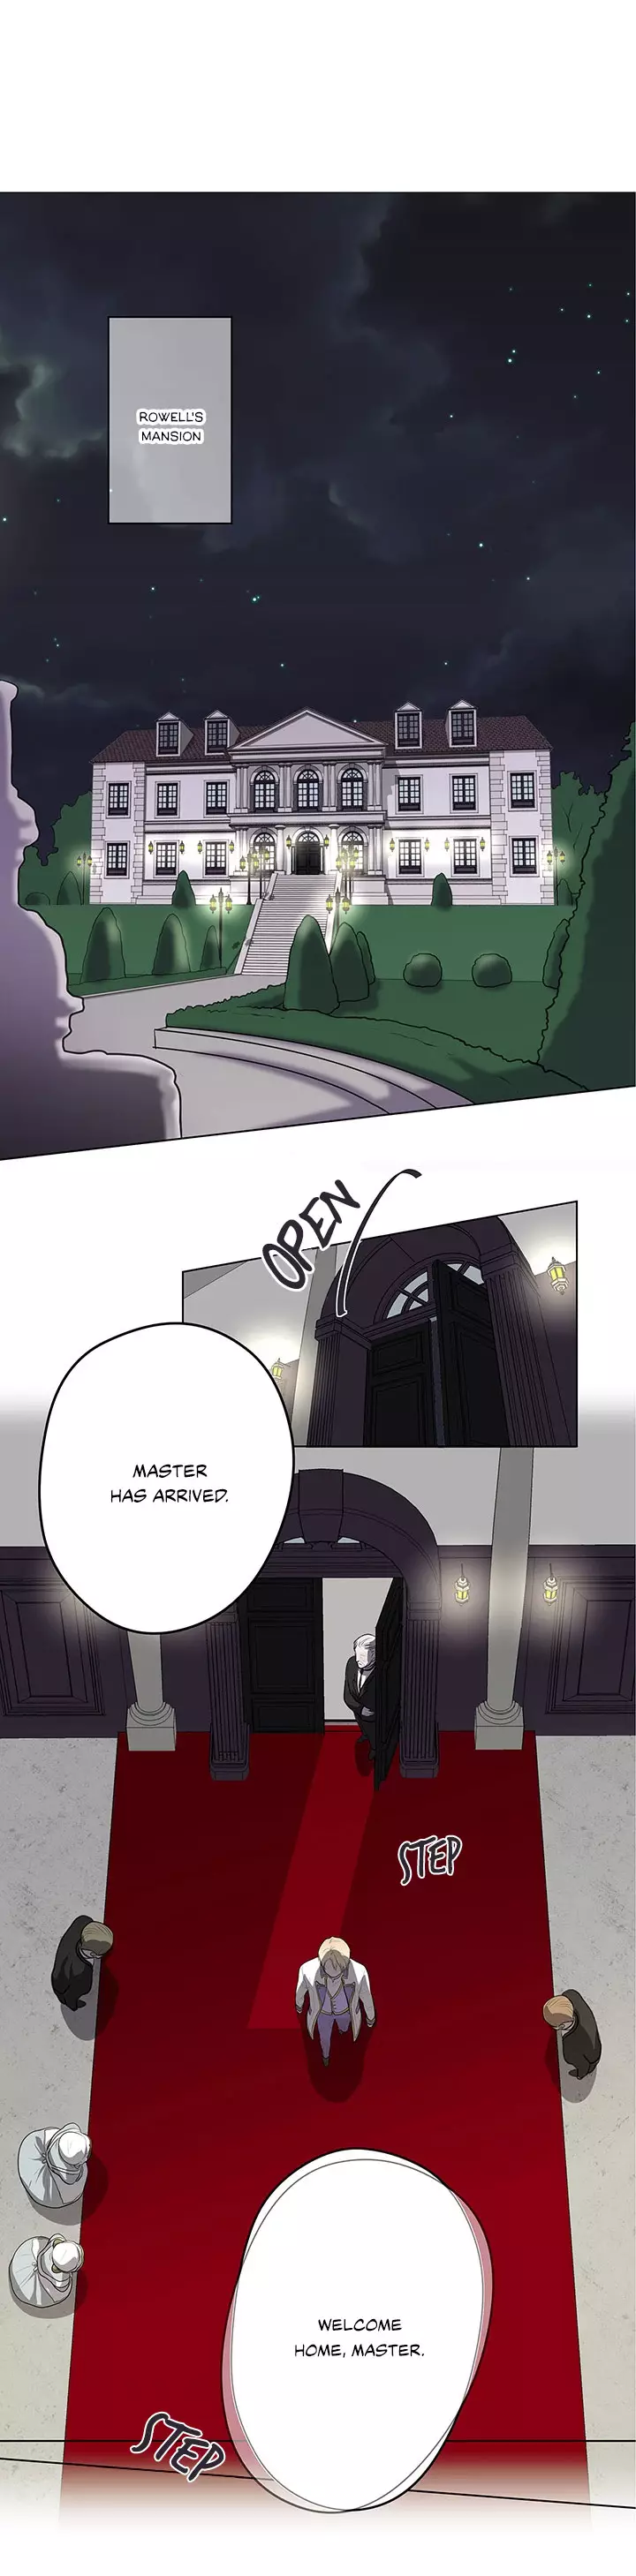 Spinel - 5 page 2